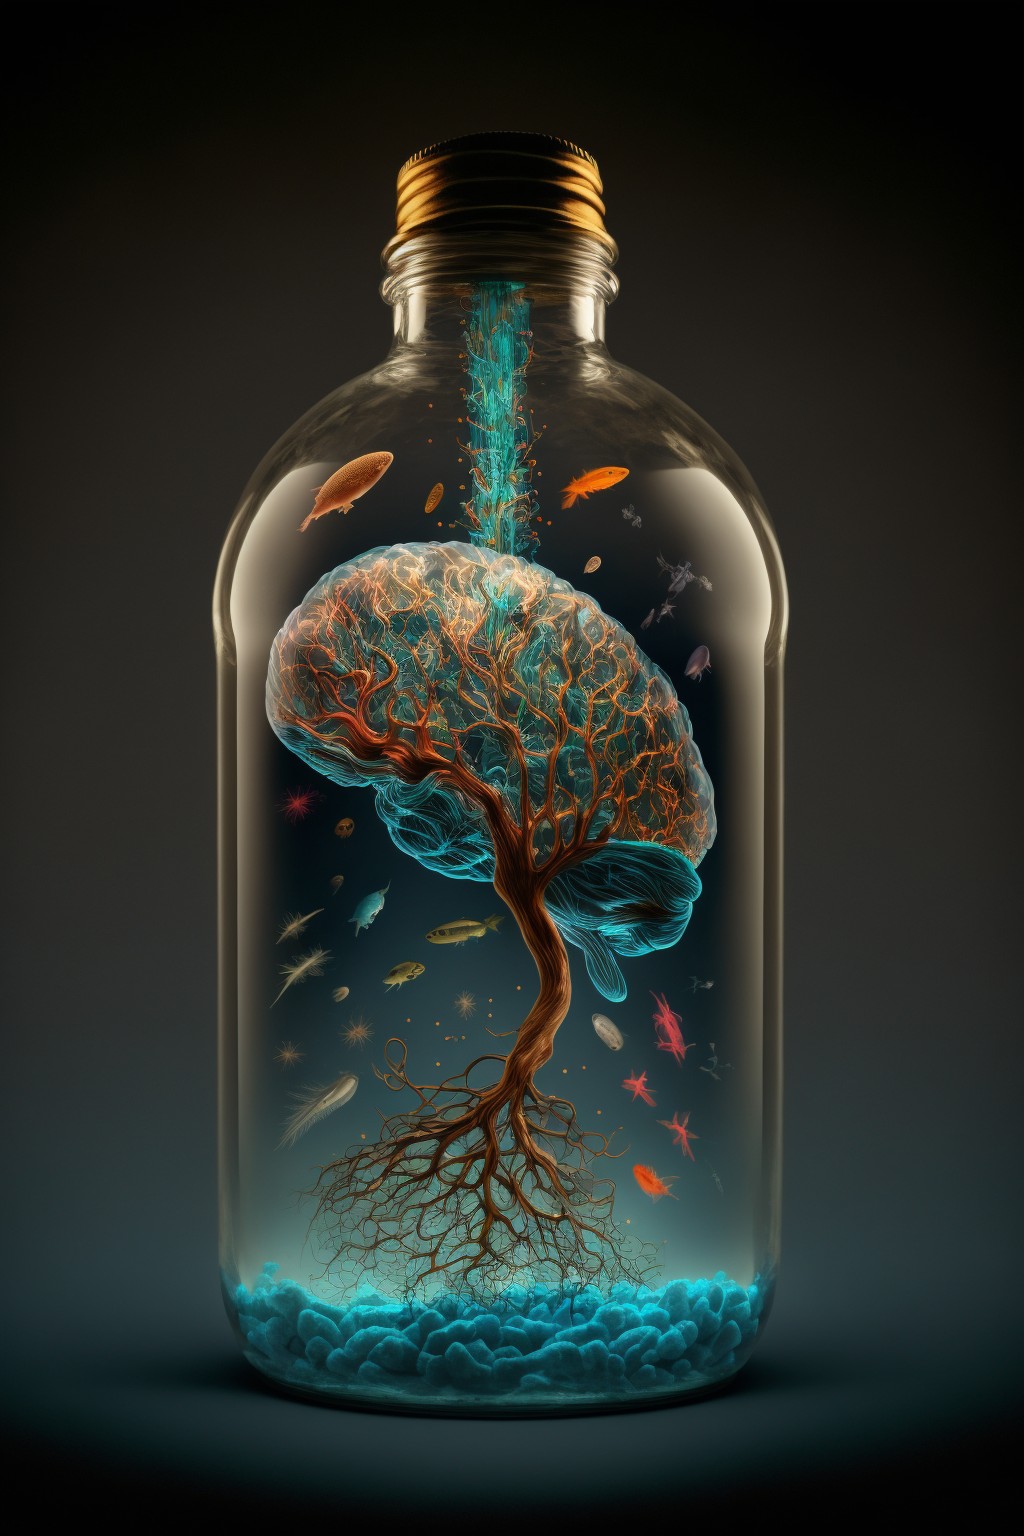 6 images of brain in a bottle by Midjourney